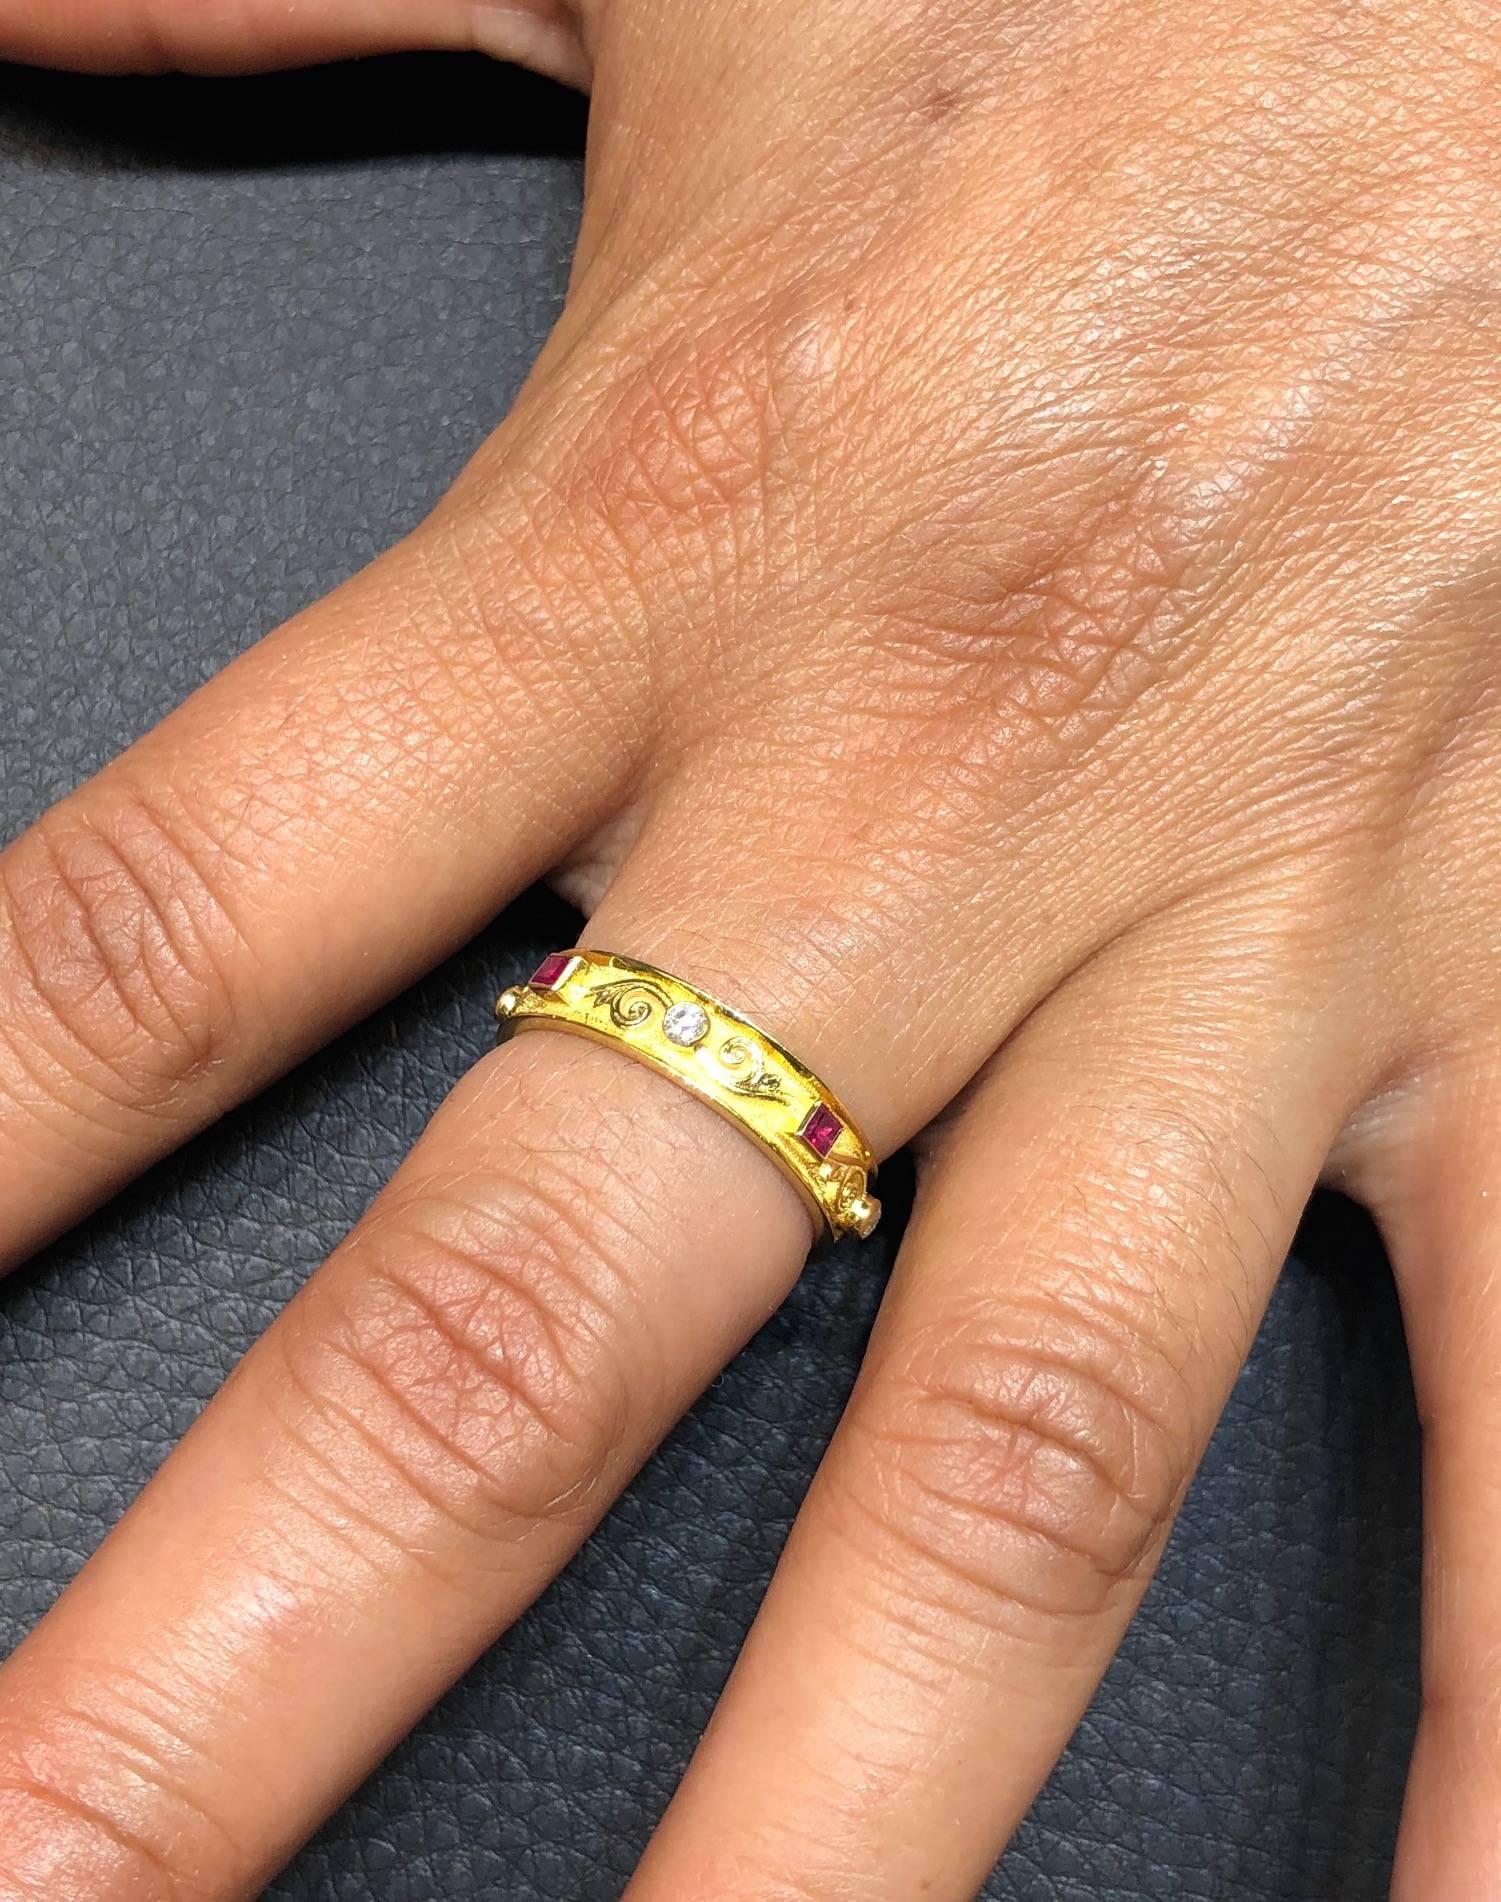 S.Georgios design ring handmade from solid 18 Karat Yellow Gold. The ring is microscopically decorated all around with gold beads and wires - granulation Byzantine work made all by hand. This band features 4 Brilliant cut Diamonds total weight 0.15